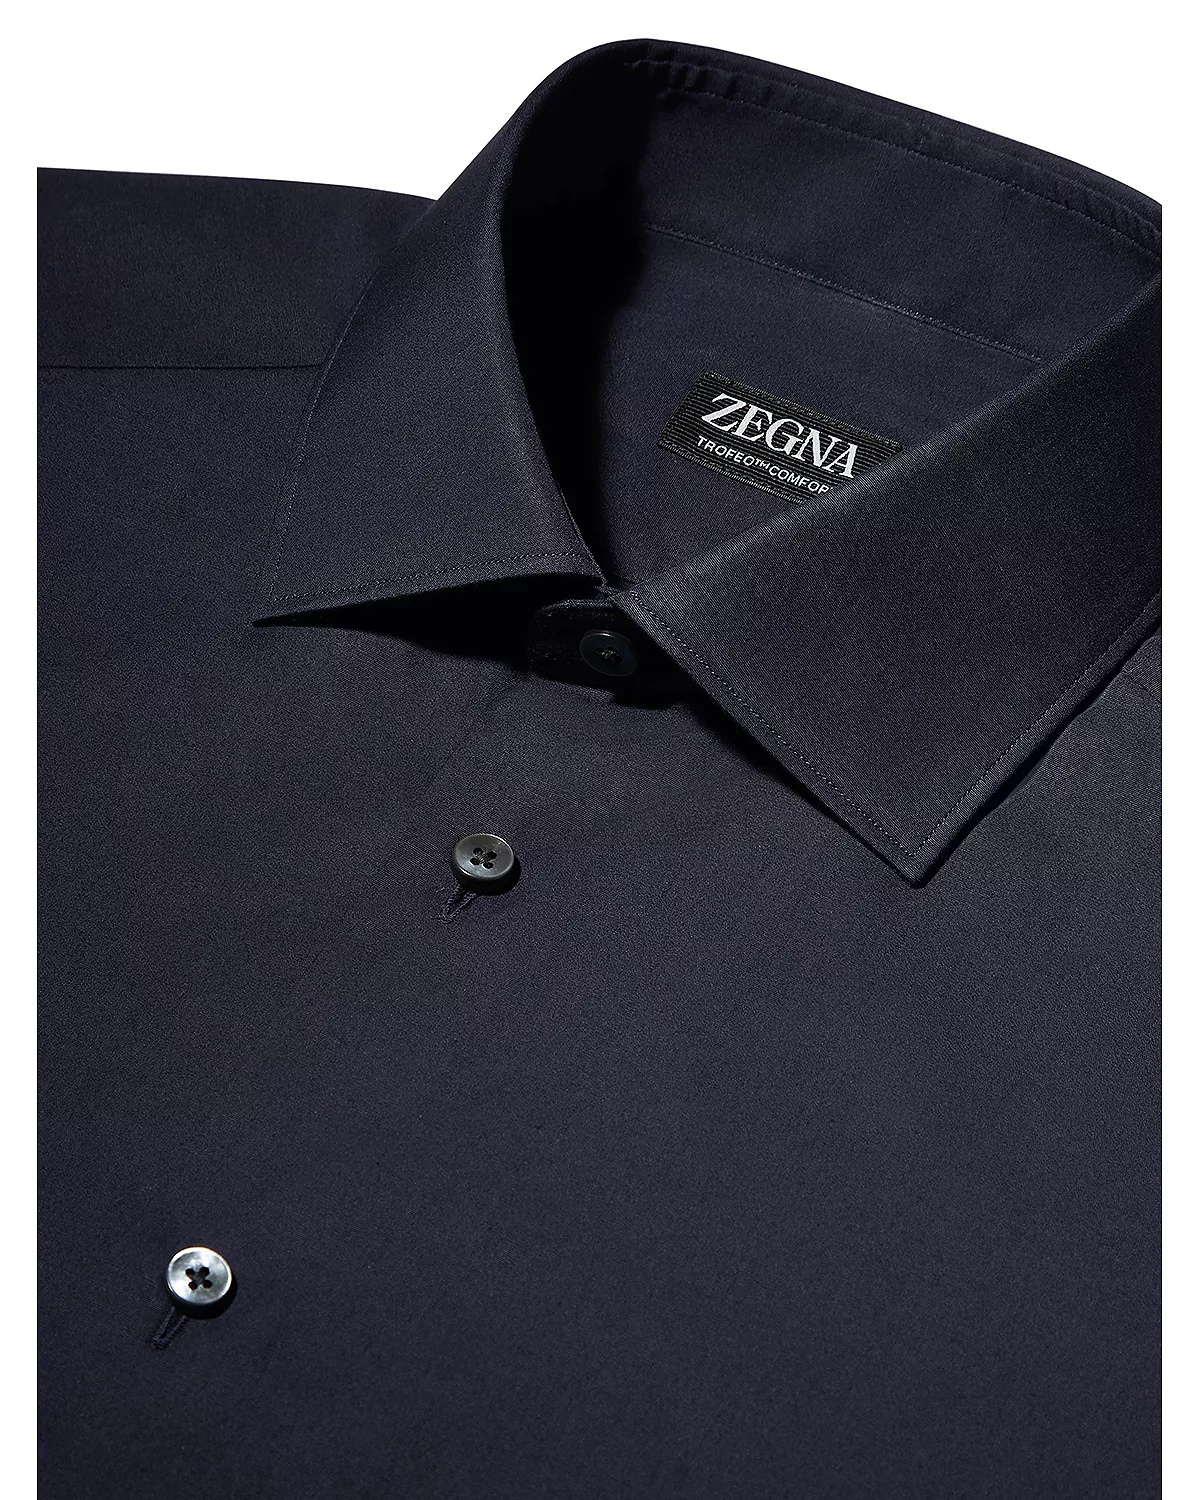 Navy Blue Trofeo™ Long Sleeve Tailored Fit Shirt - 3